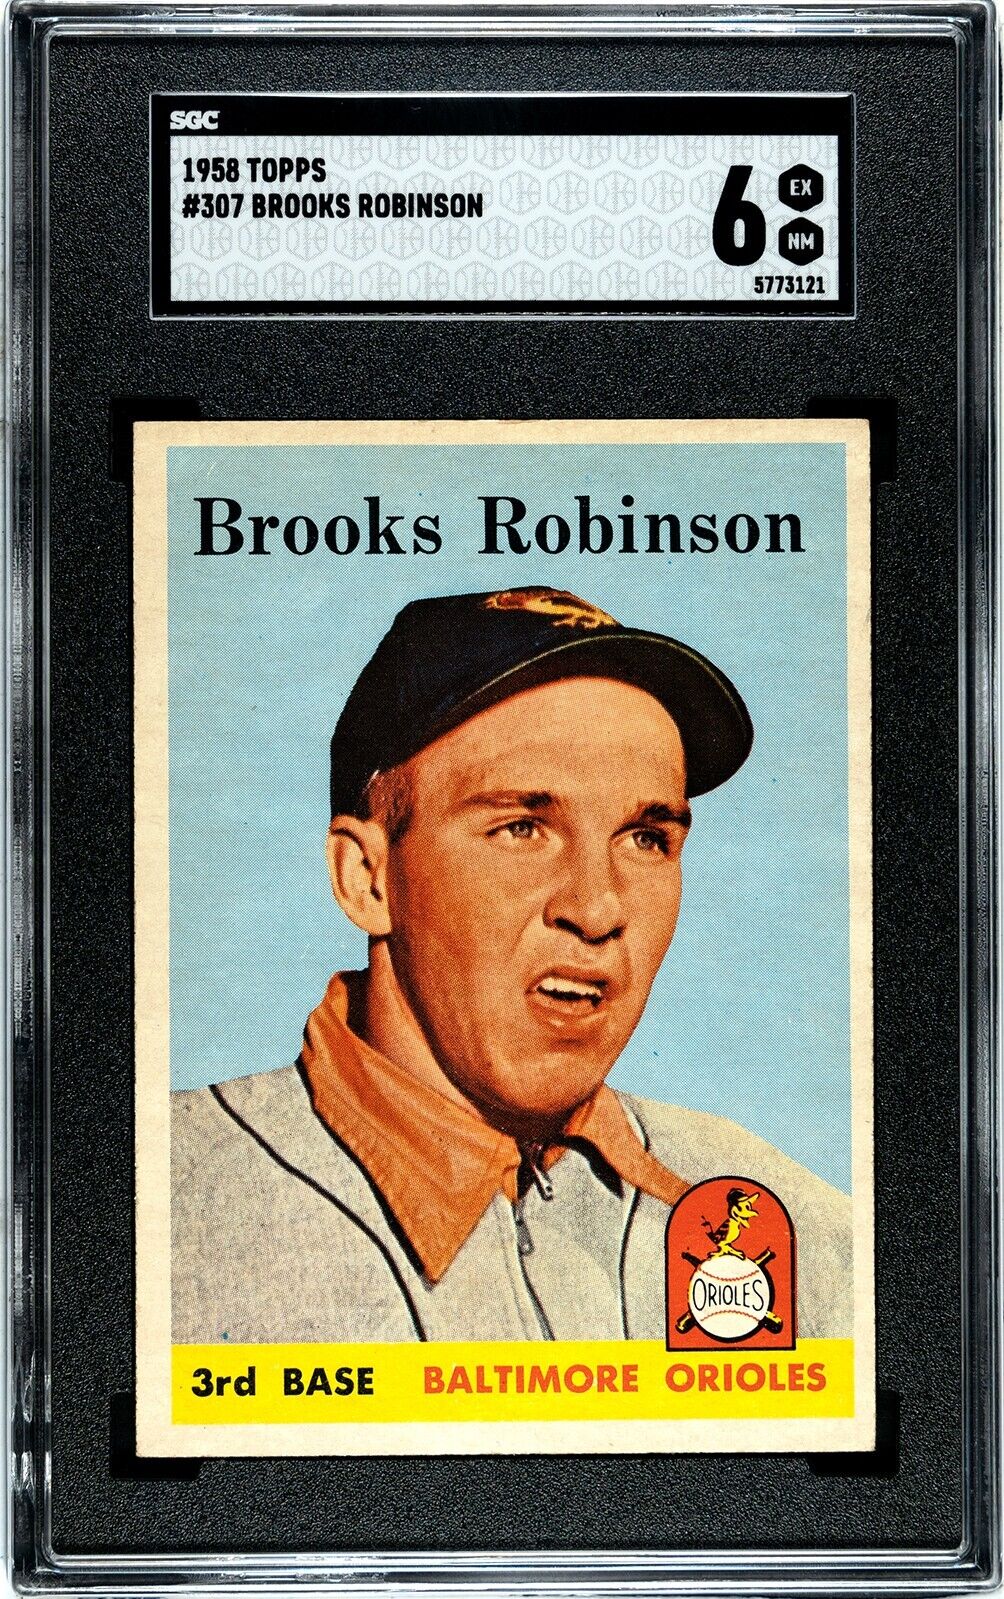 1958 Topps #307 Brooks Robinson Orioles 2nd Year SGC 6 GORGEOUS Color Centering!